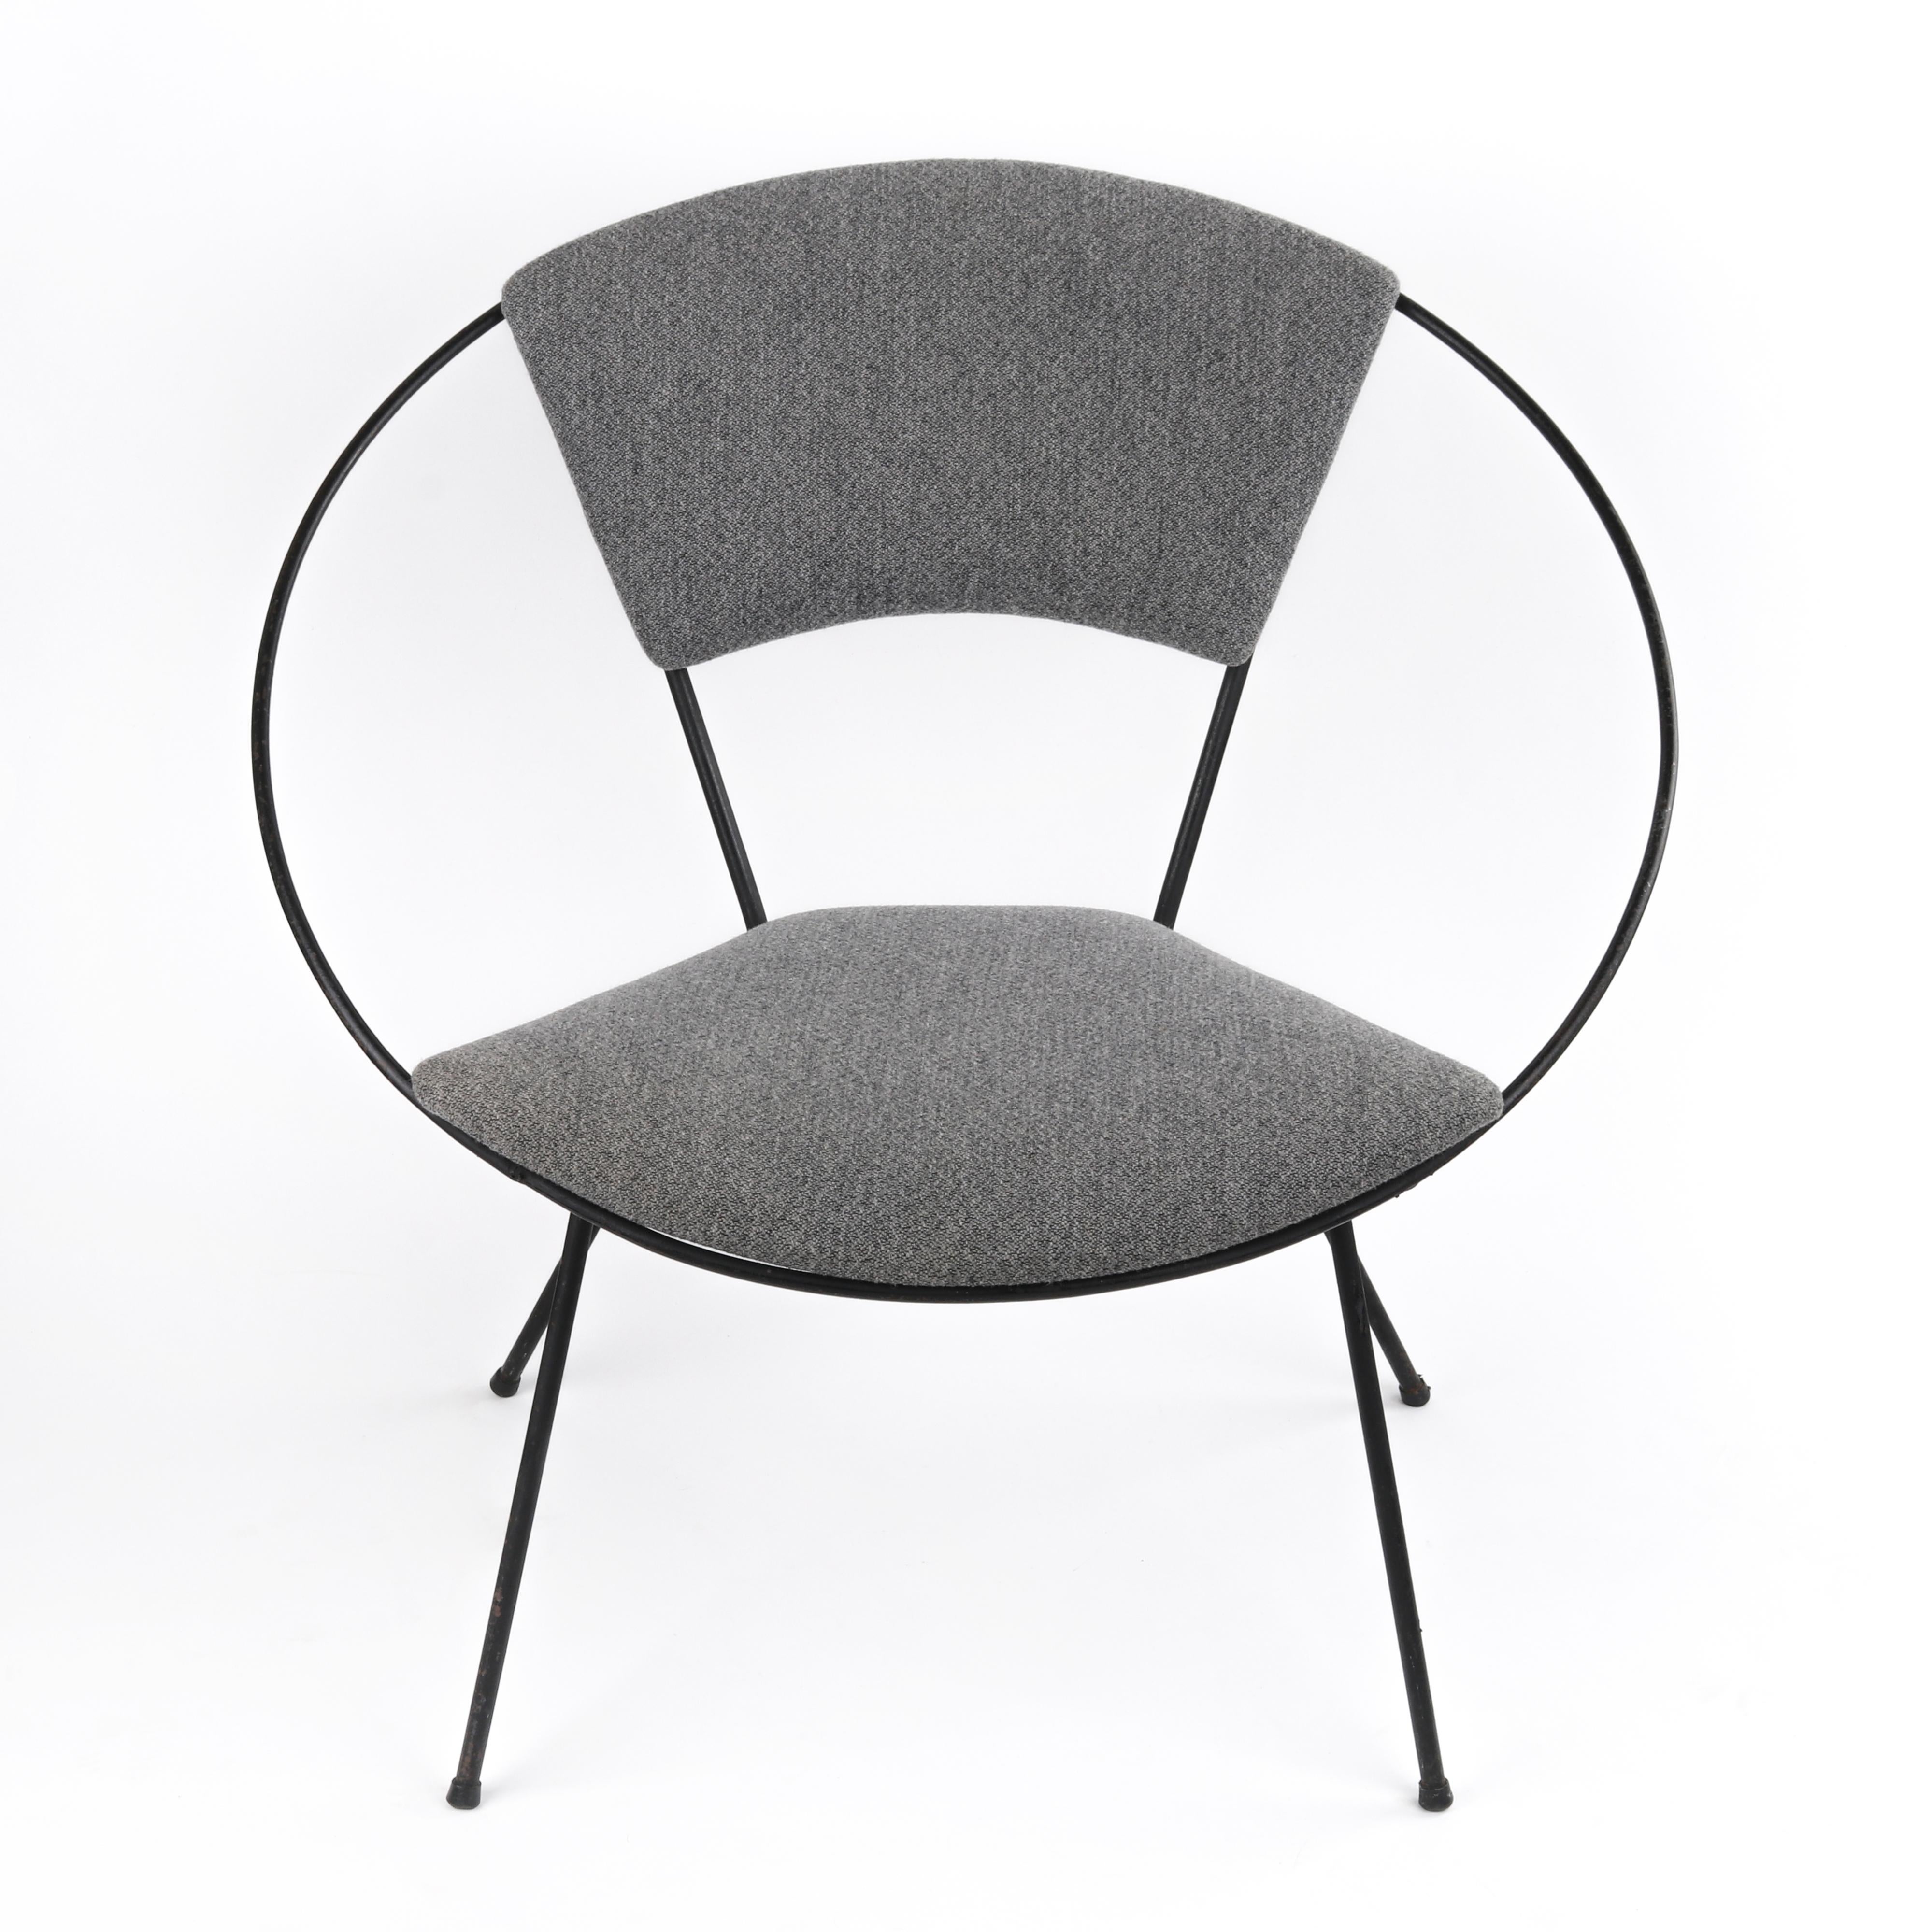 Joseph Cicchelli for Reilly-Wolff 1950's Mid-Century Modern Wrought Iron Metal Circle Hoop Frame Upholstered Lounge Chair

This mid-century piece is soundly structured with a strong iron frame in a circle/hoop shape. Professionally re-upholstered